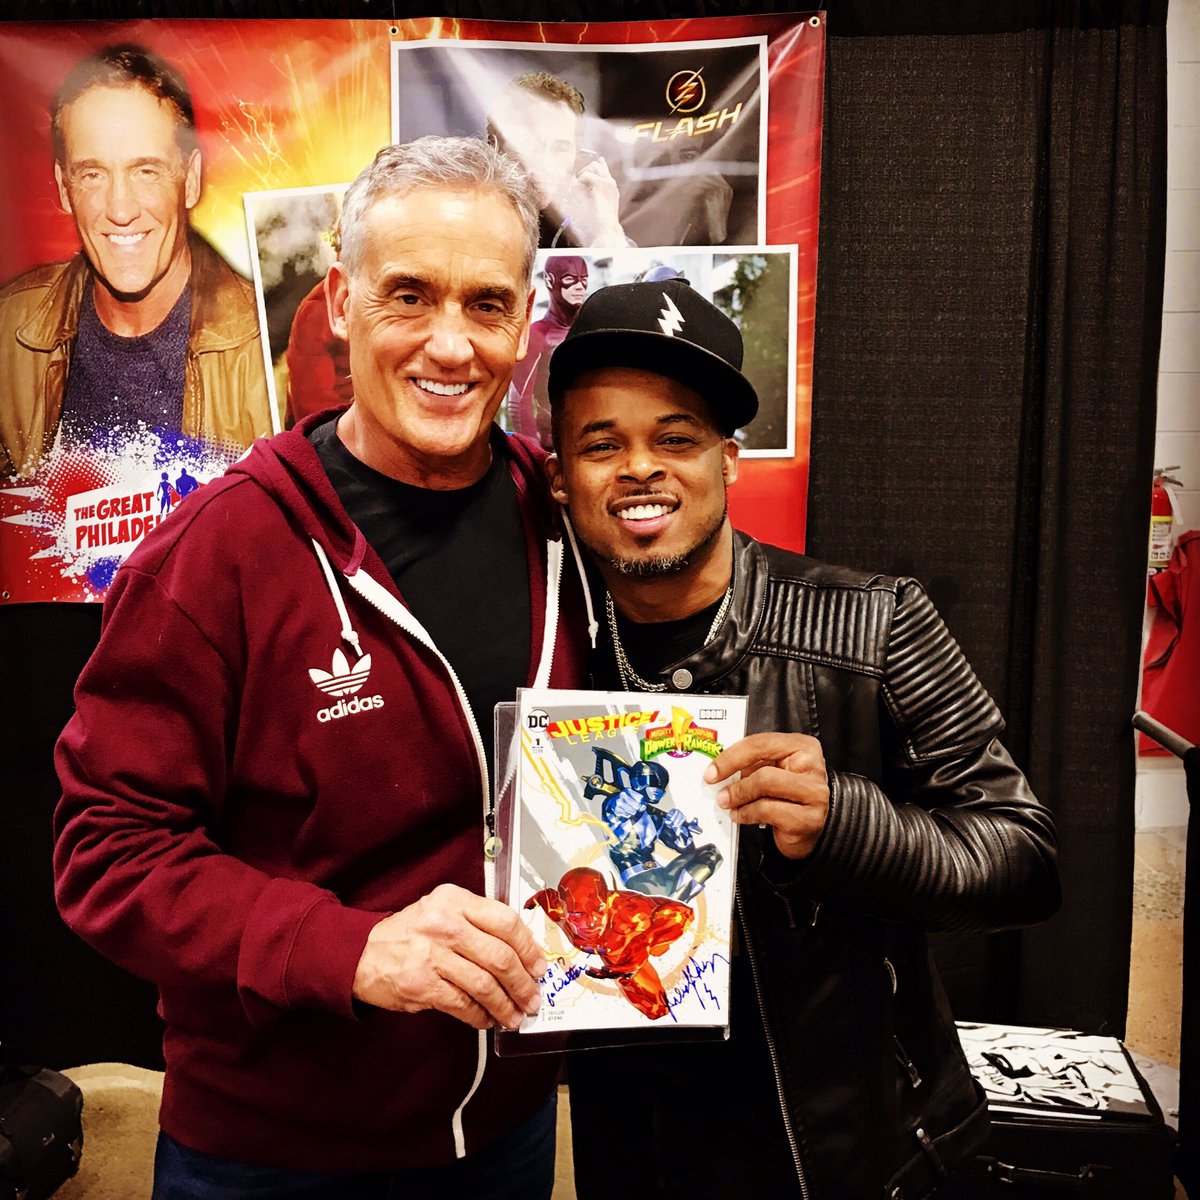 When the Original Flash and the Original Black Ranger meet in Person and in the Comic Book!!
#jaygarrickflash #walterejones  #mmpr #Flash